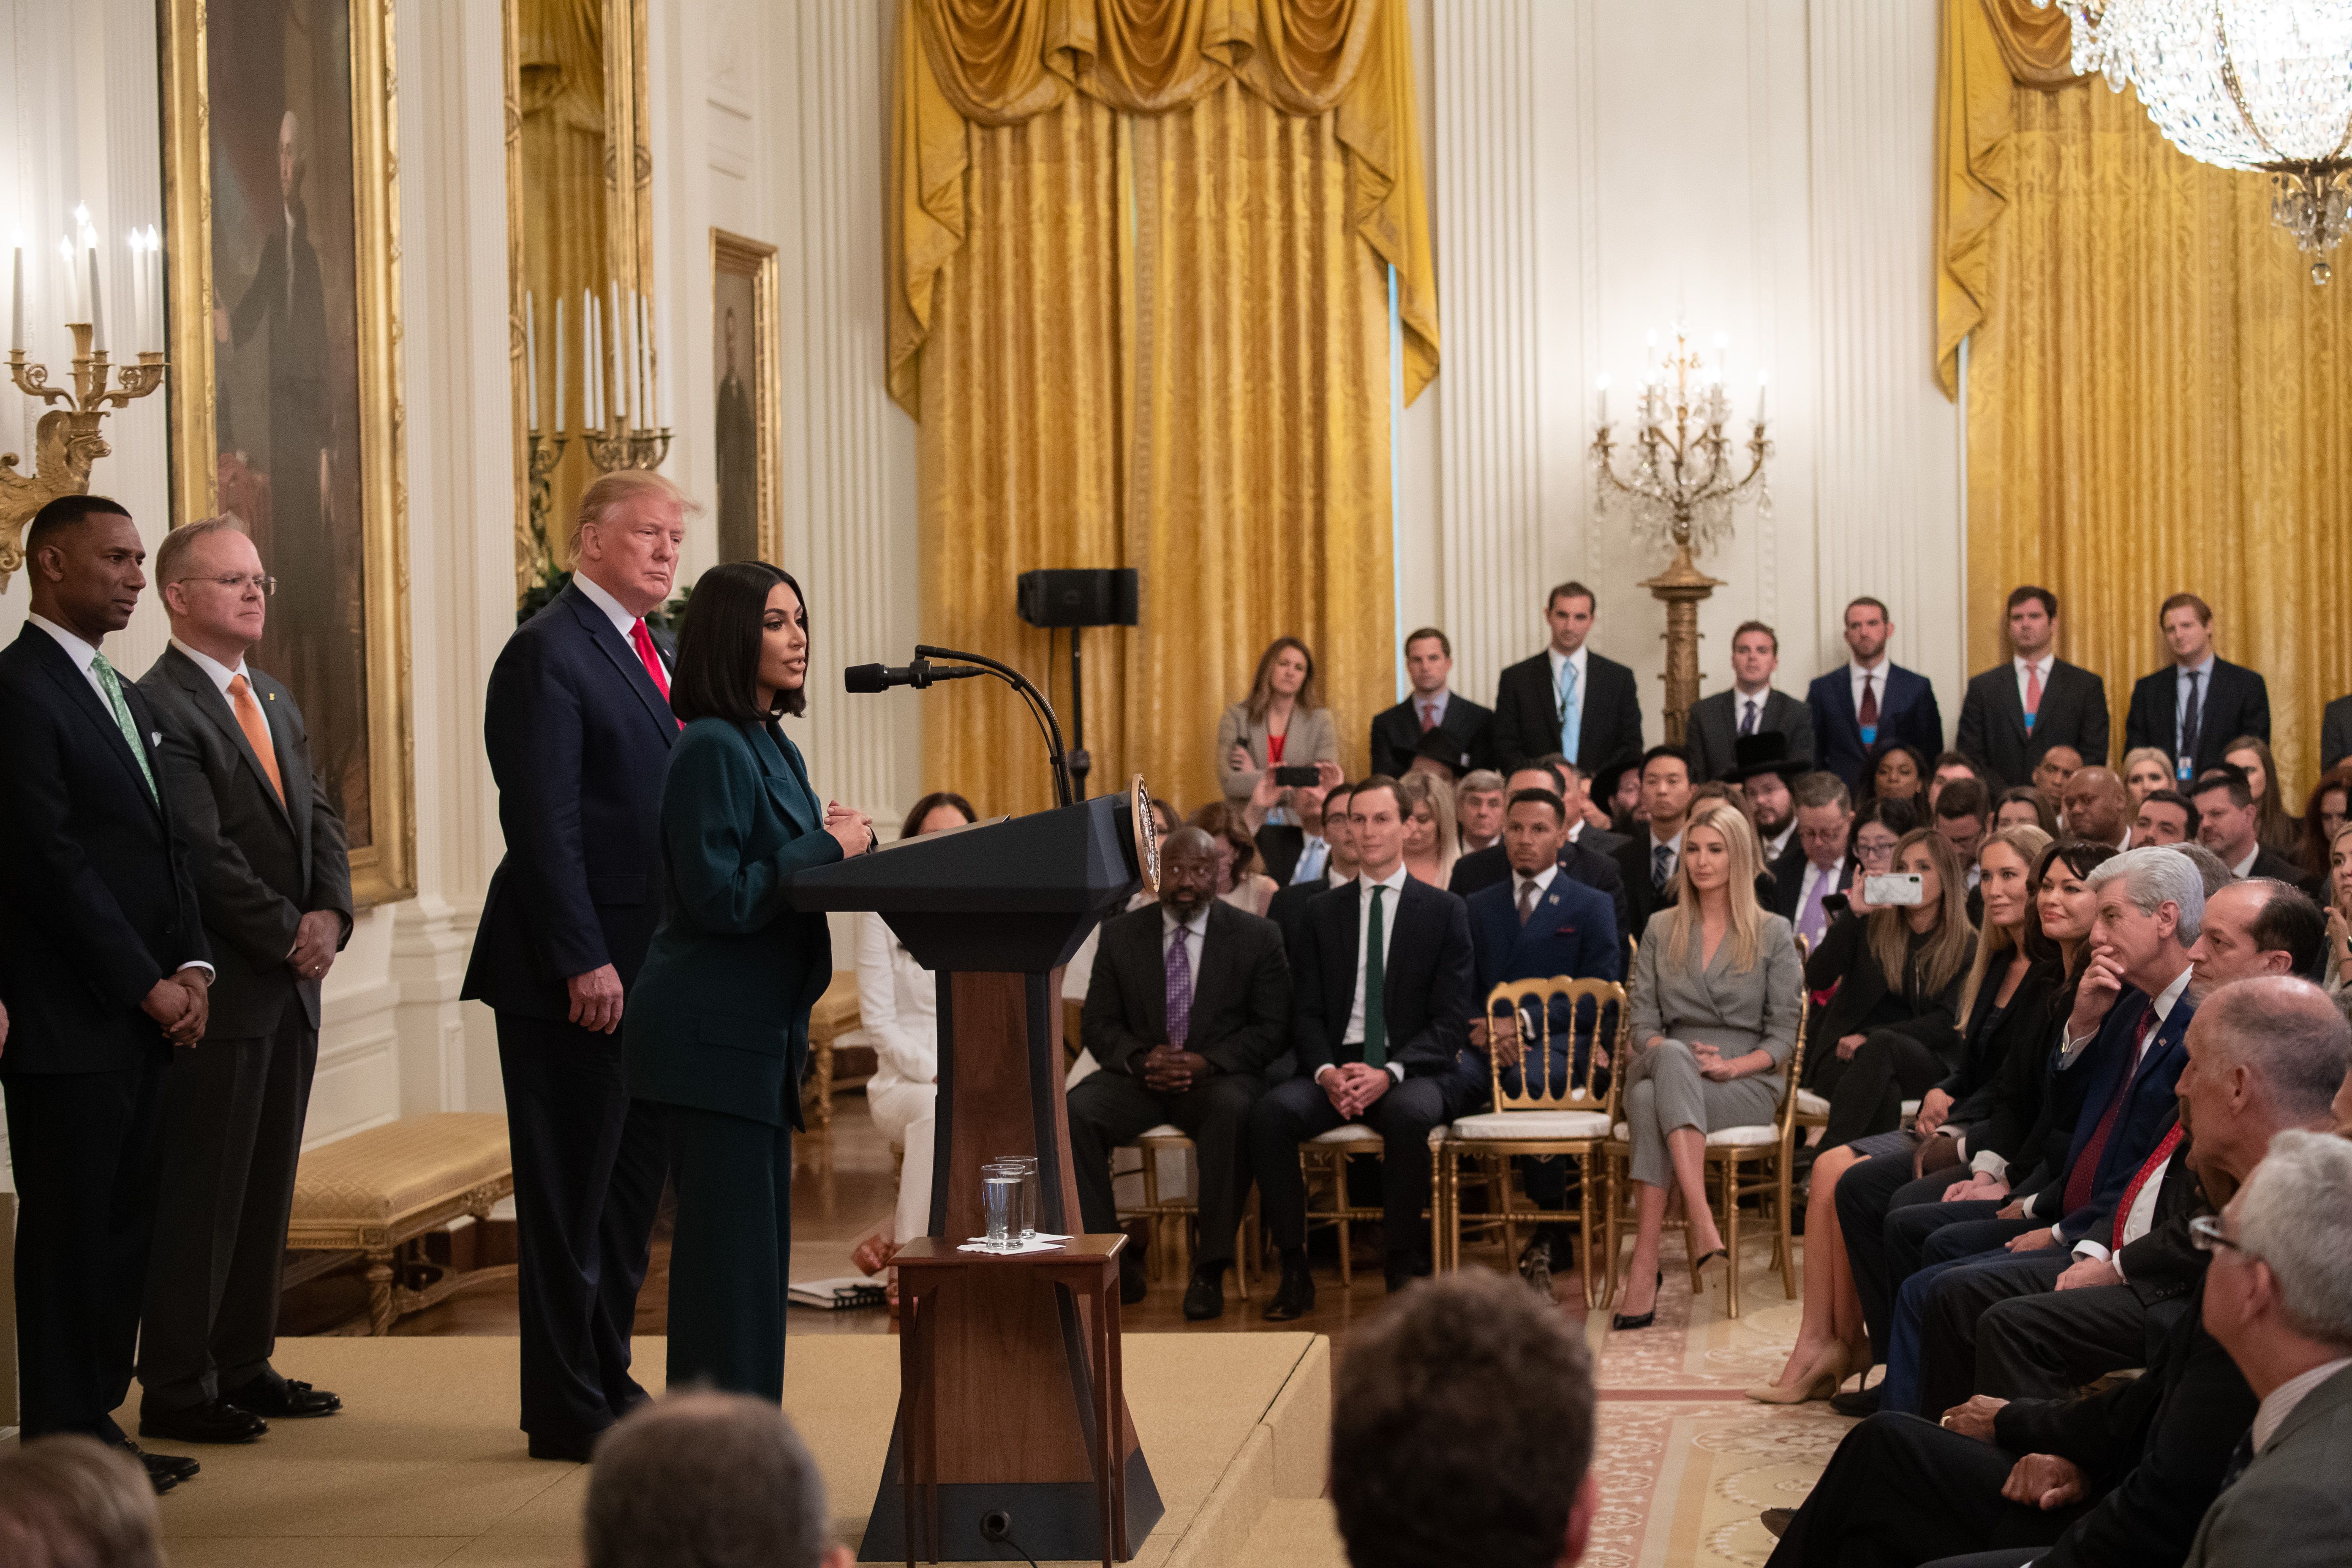 Kim Kardashian speaks alongside US President Donald Trump during a second chance hiring and criminal justice reform event in the East Room of the White House in Washington, DC, June 13, 2019. (Photo credit SAUL LOEB/AFP/Getty Images)